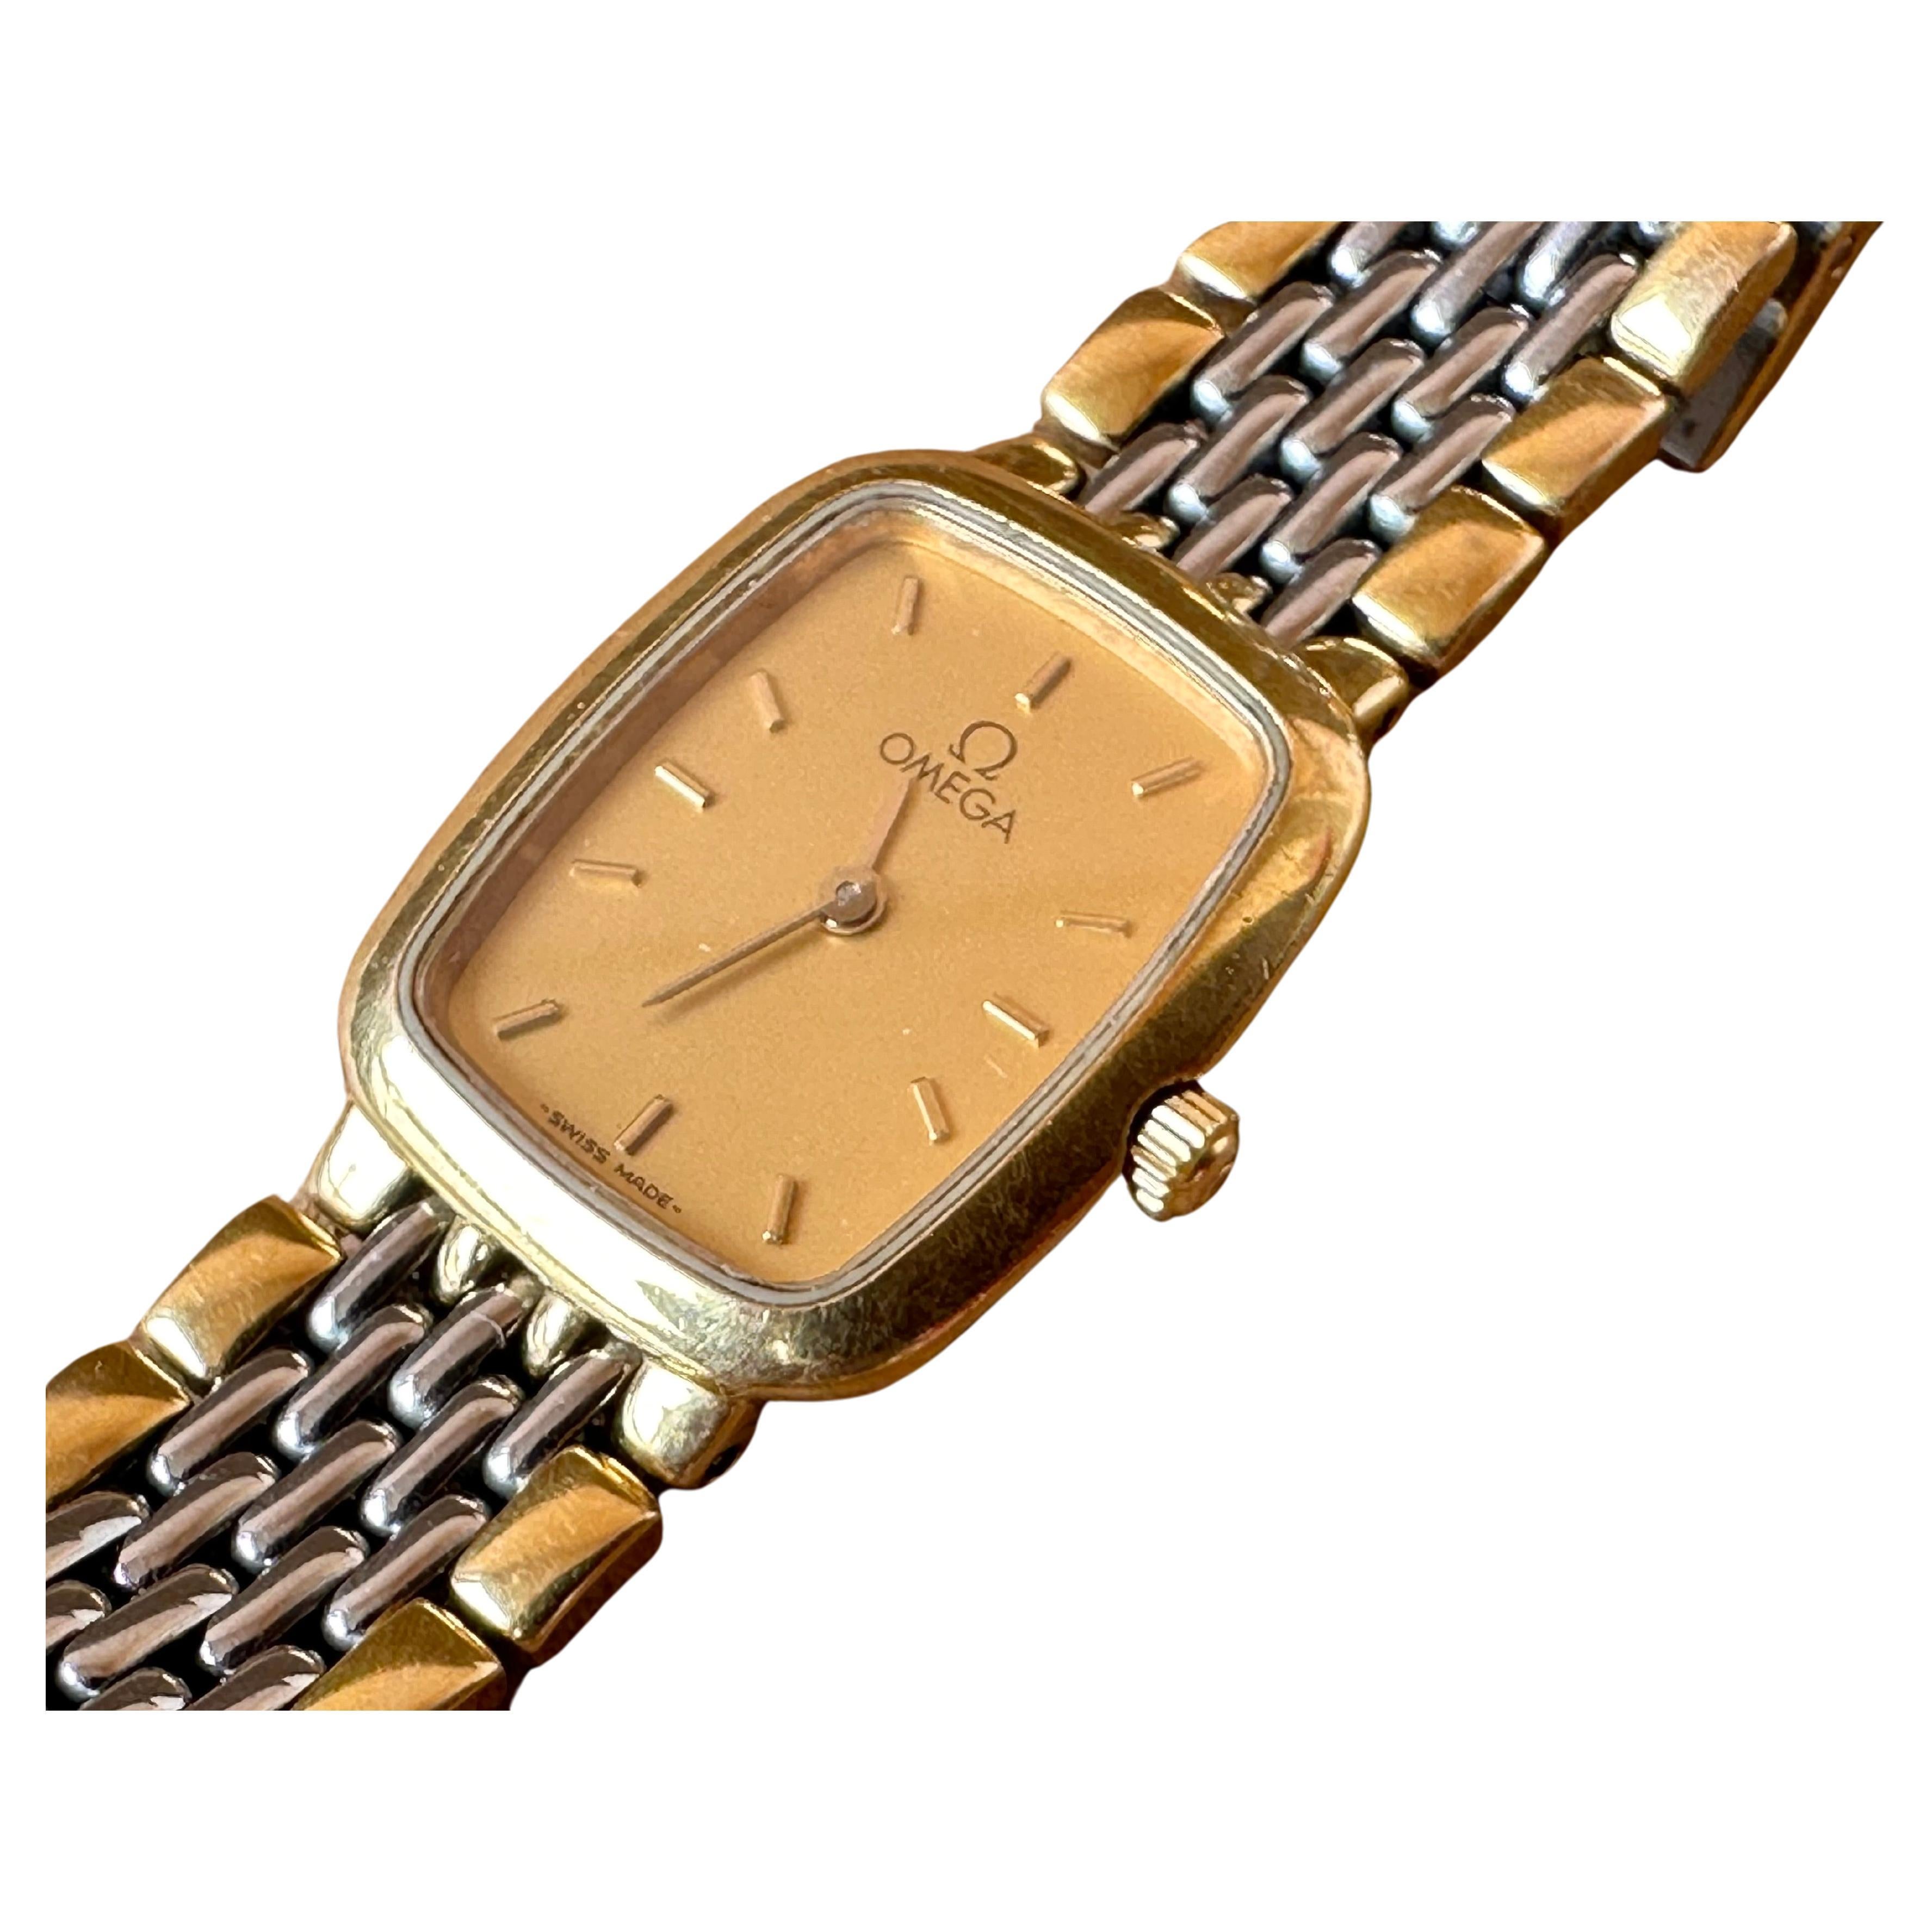 Brand: Omega

Model: De Ville

Reference Number: 53564103

Country Of Manufacture: Switzerland

Movement: Quartz

Case Material: Gold Plated Stainless steel

Measurements : Case width: 18 mm. (without crown) x 23mm

Band Type : Gold Plated &